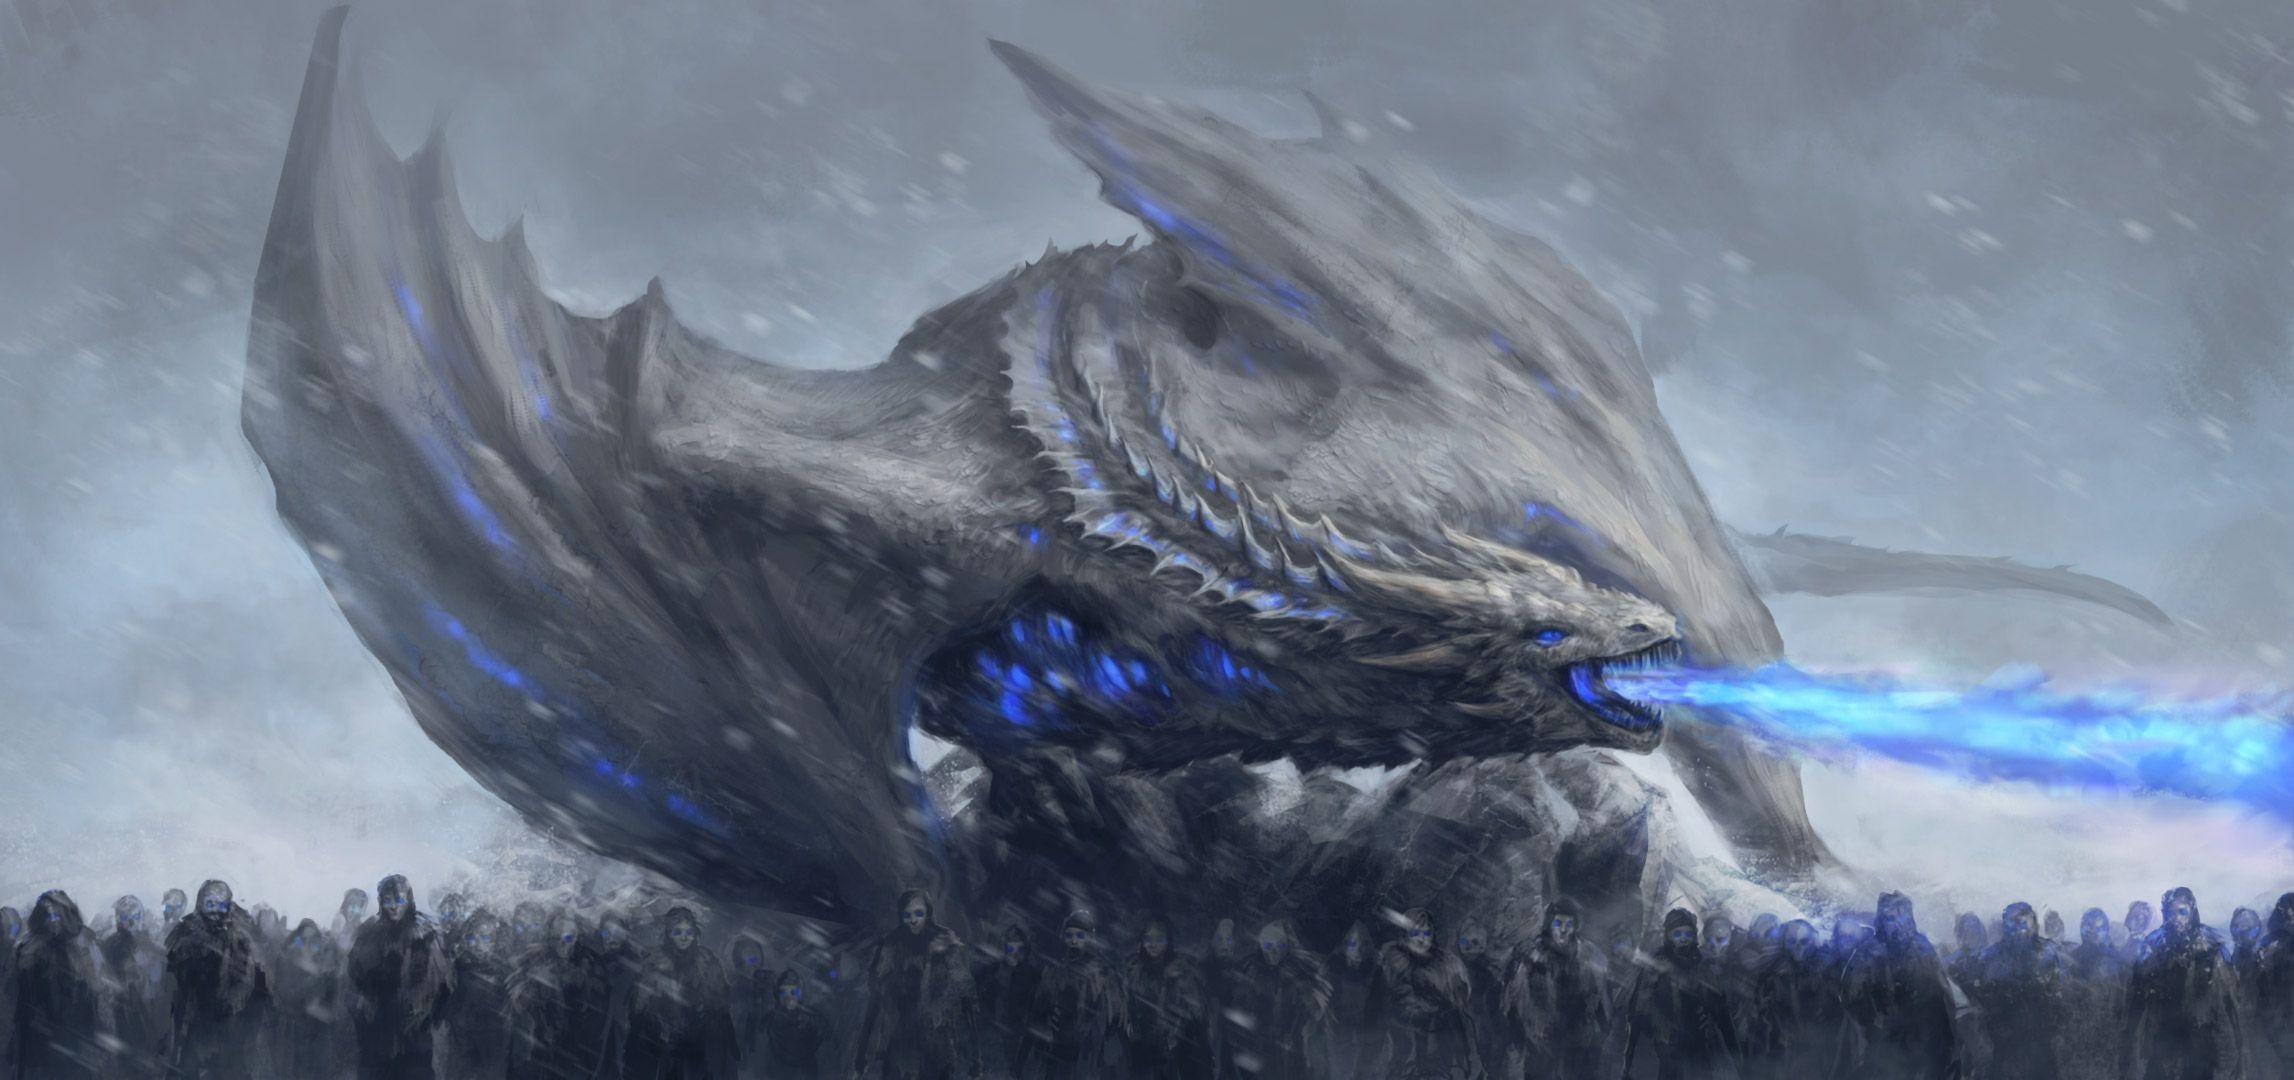 White Walkers Dragon Game Of Thrones, HD Tv Shows, 4k Wallpaper